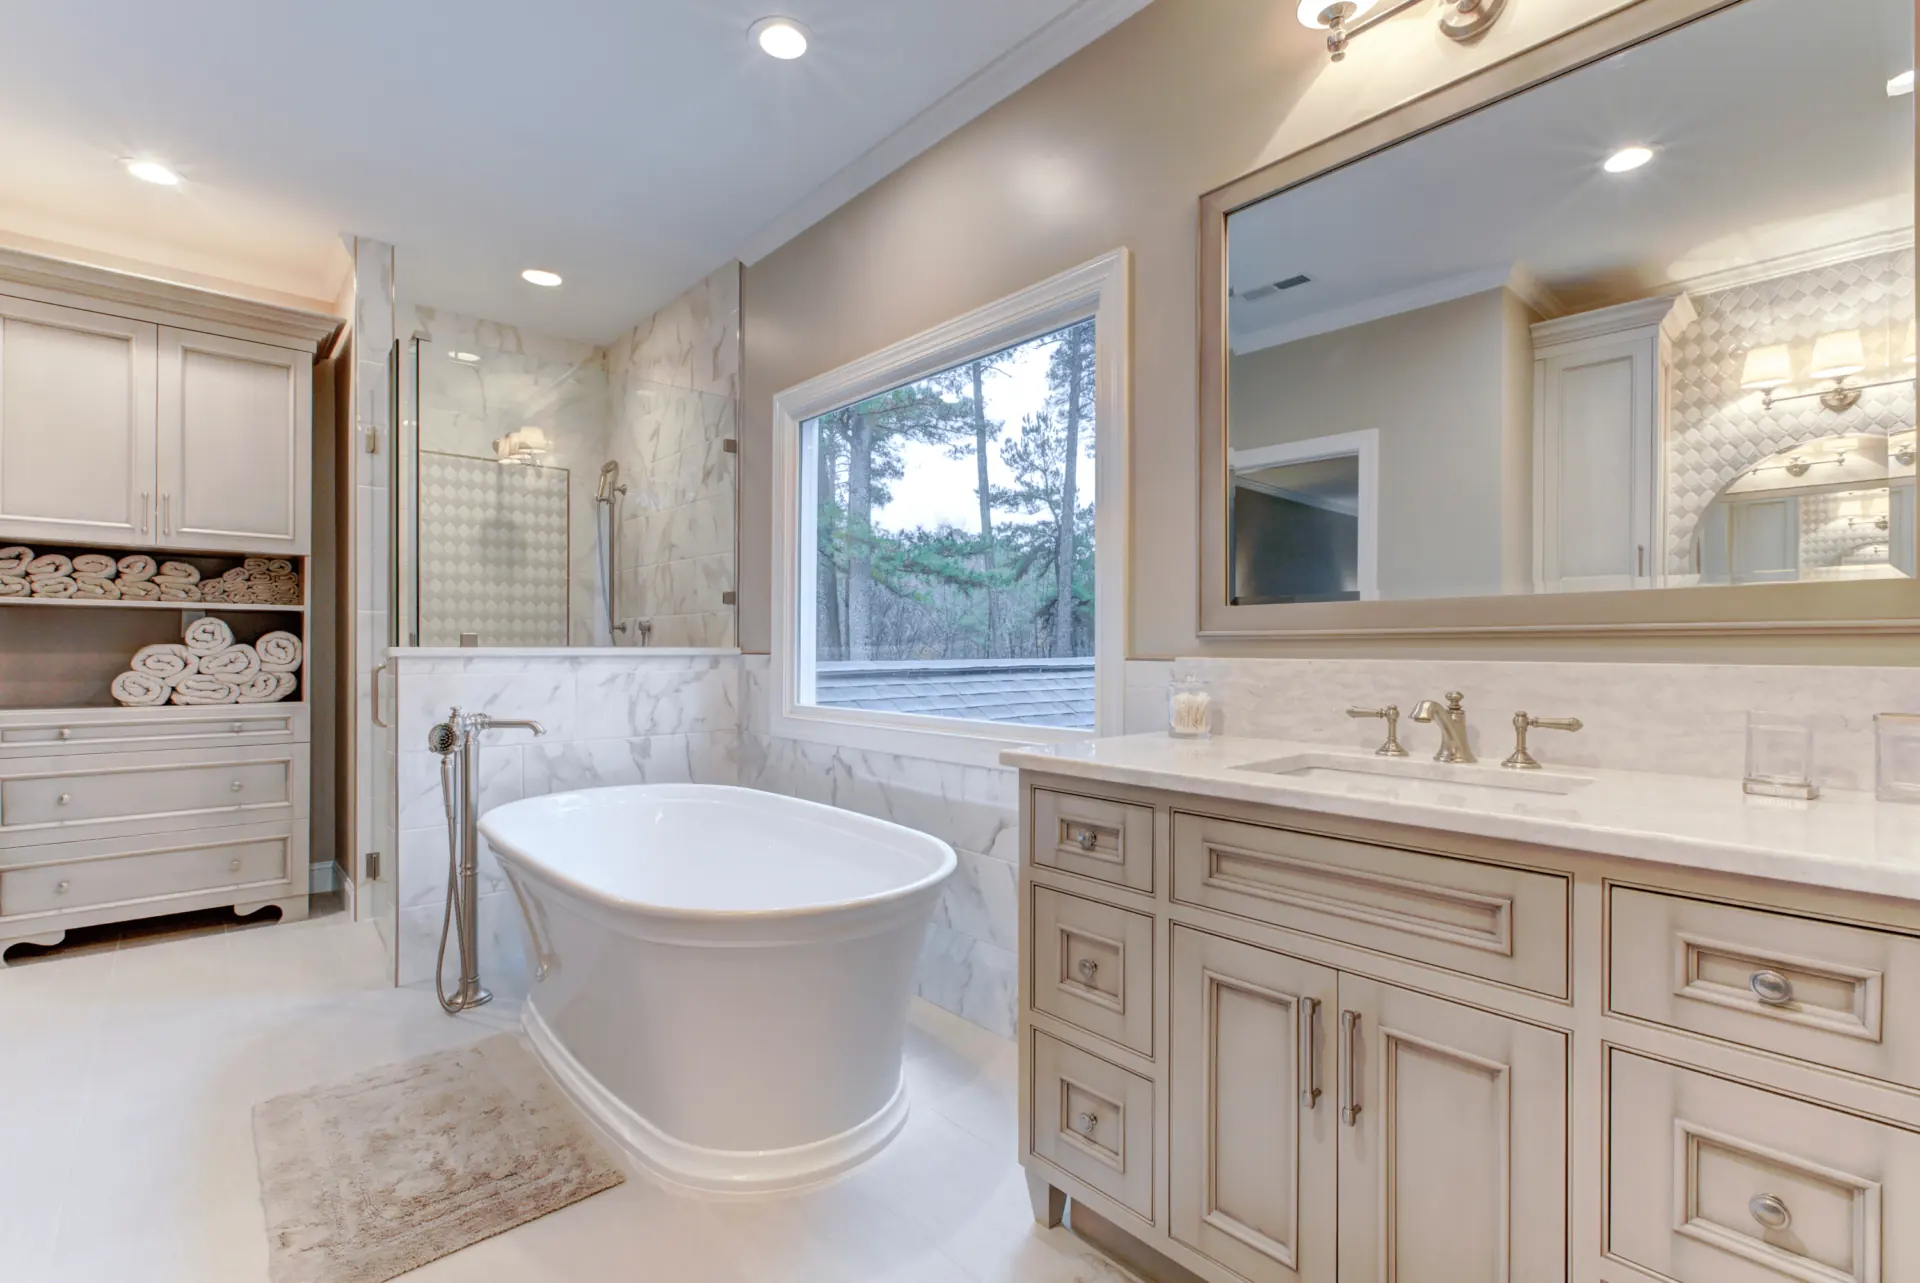 Bathroom Remodeling Tips for the Adventure Lover